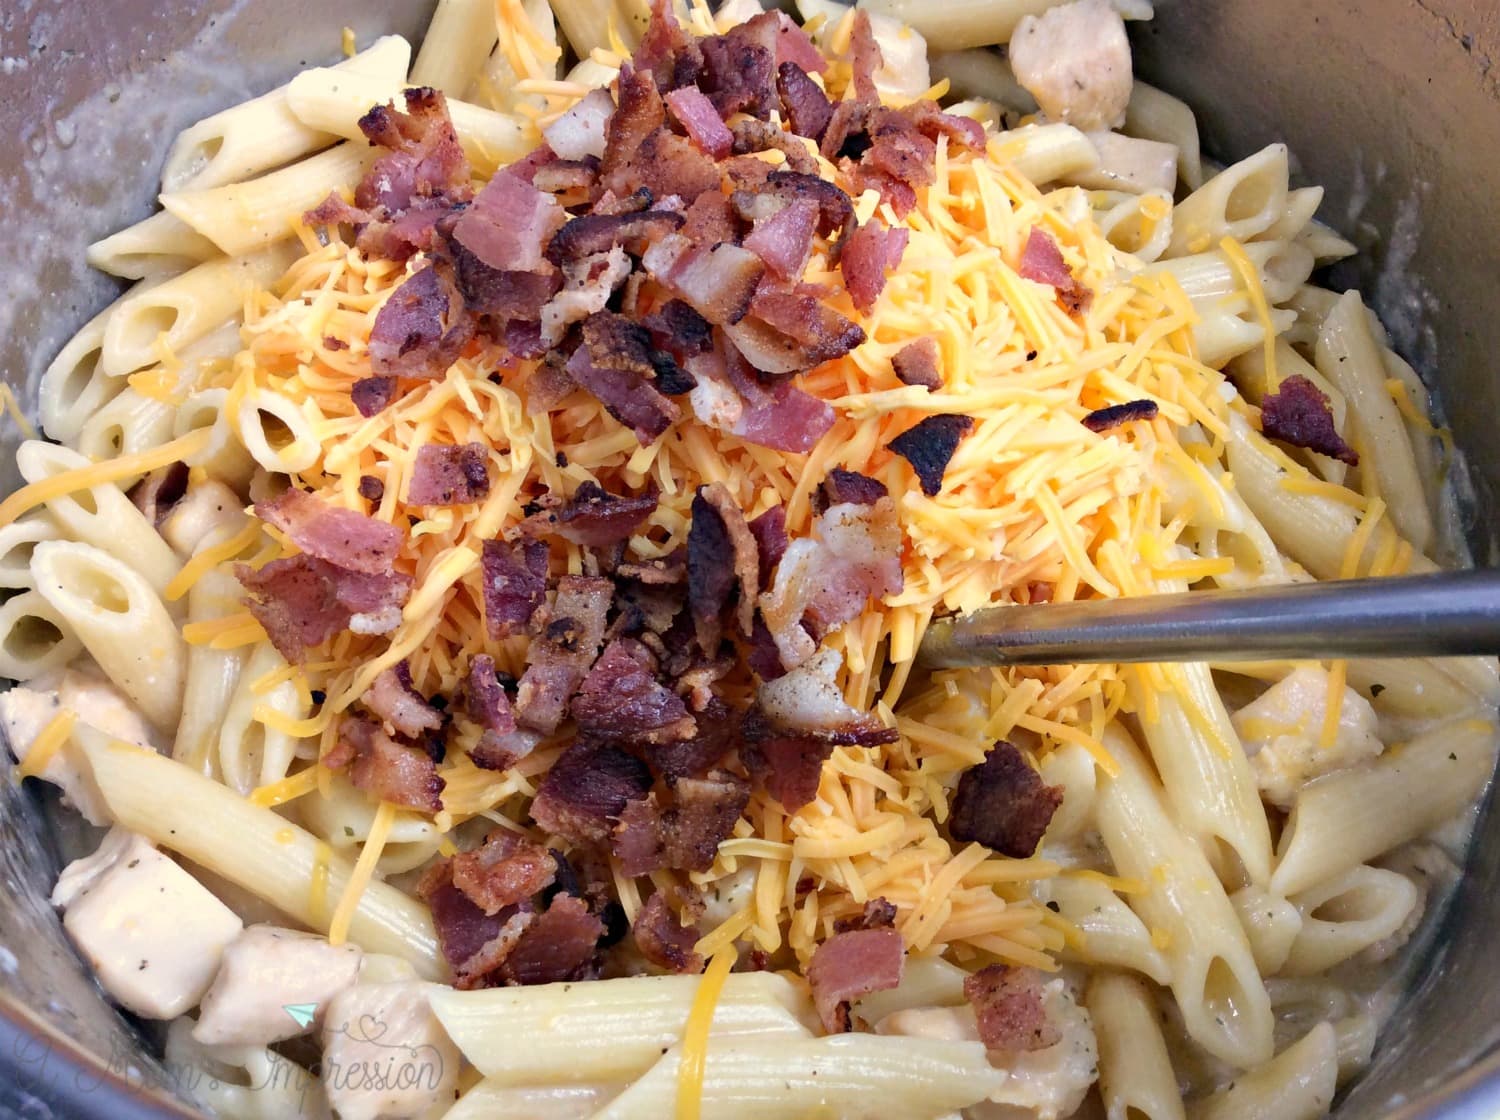 Crispy Bacon and Cheddar Cheese is added to the Crack Chicken Pasta